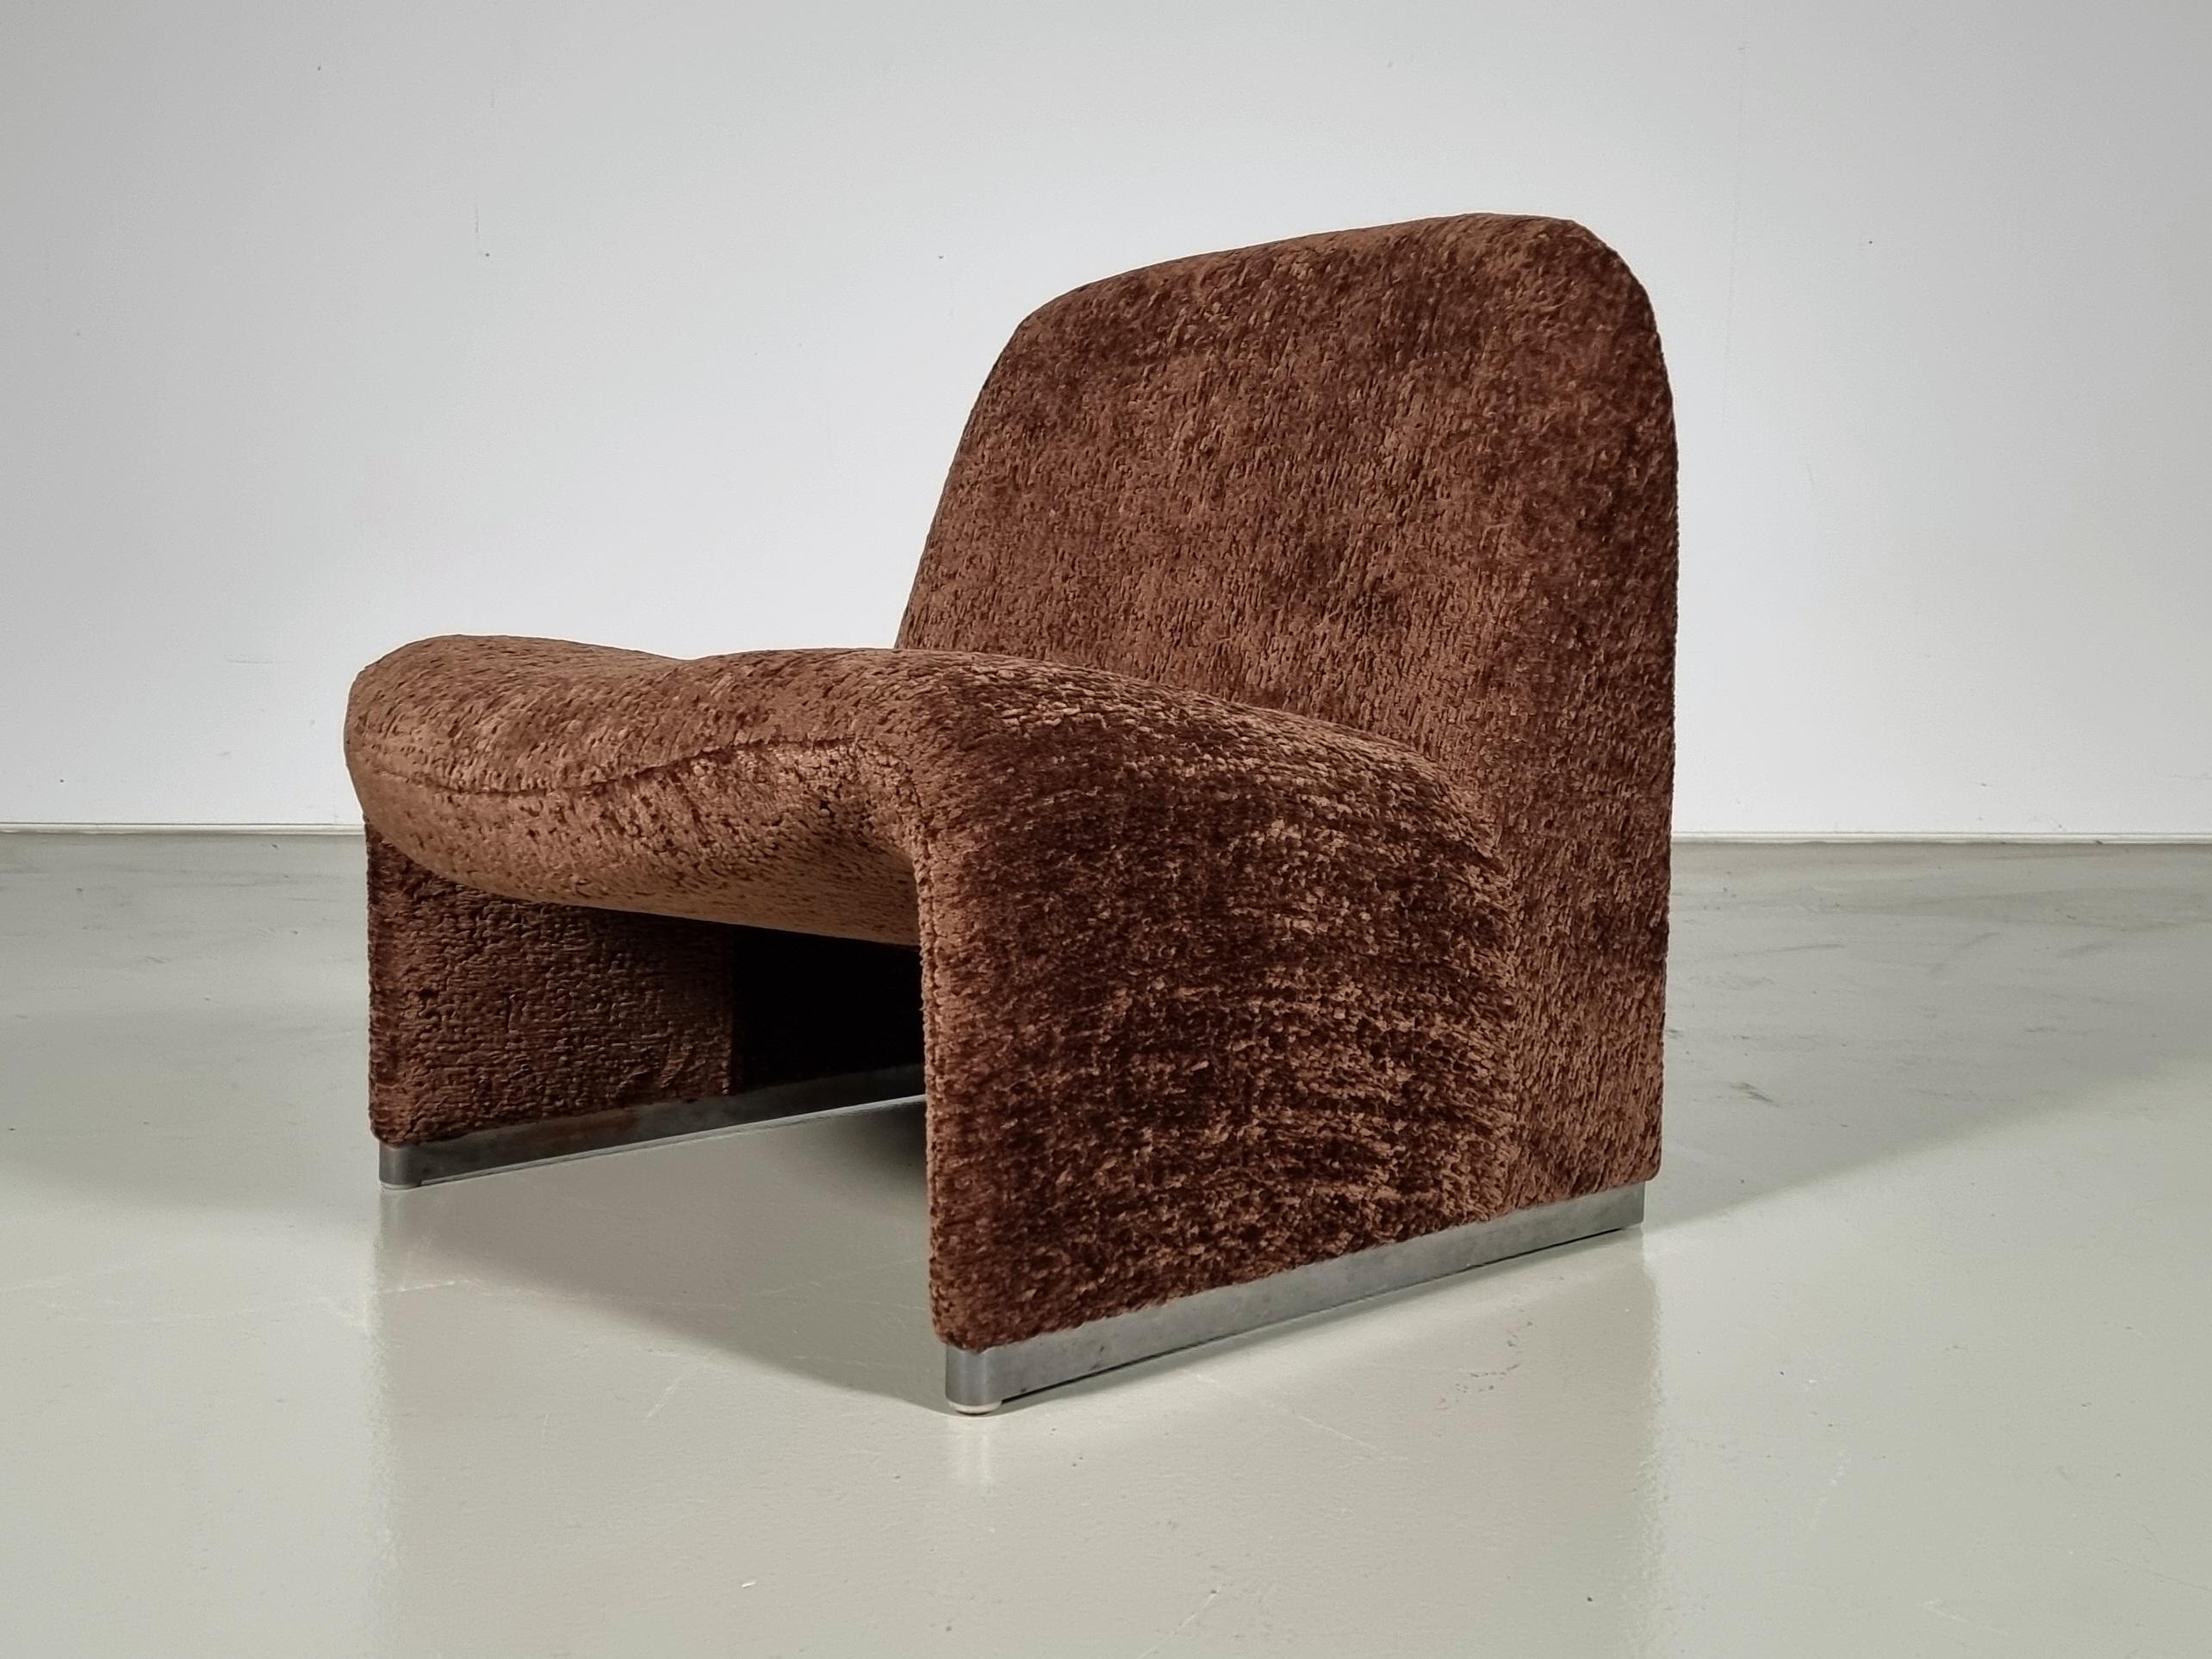 Alky chair by Giancarlo Piretti for Castelli, 1970s. Reupholstered in a beautiful high-quality brown boucle by Pierre Frey. Aluminum frame and polished chrome footrests. Beautiful organic curves are reminiscent of Pierre Paulin's designs.